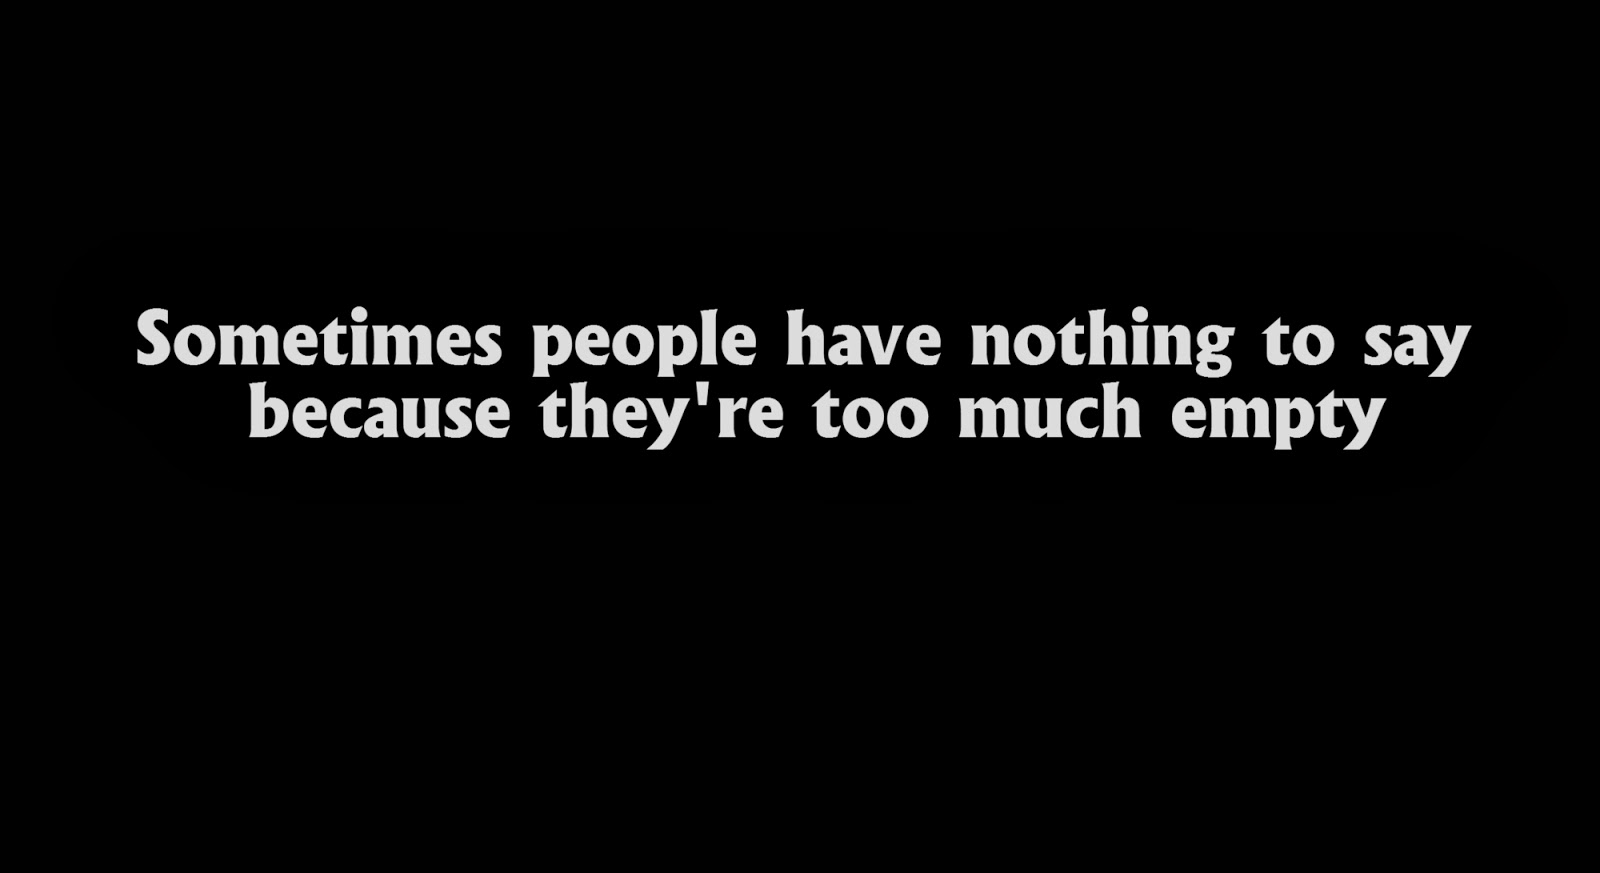 Sometimes people have nothing to say because they're too much empty